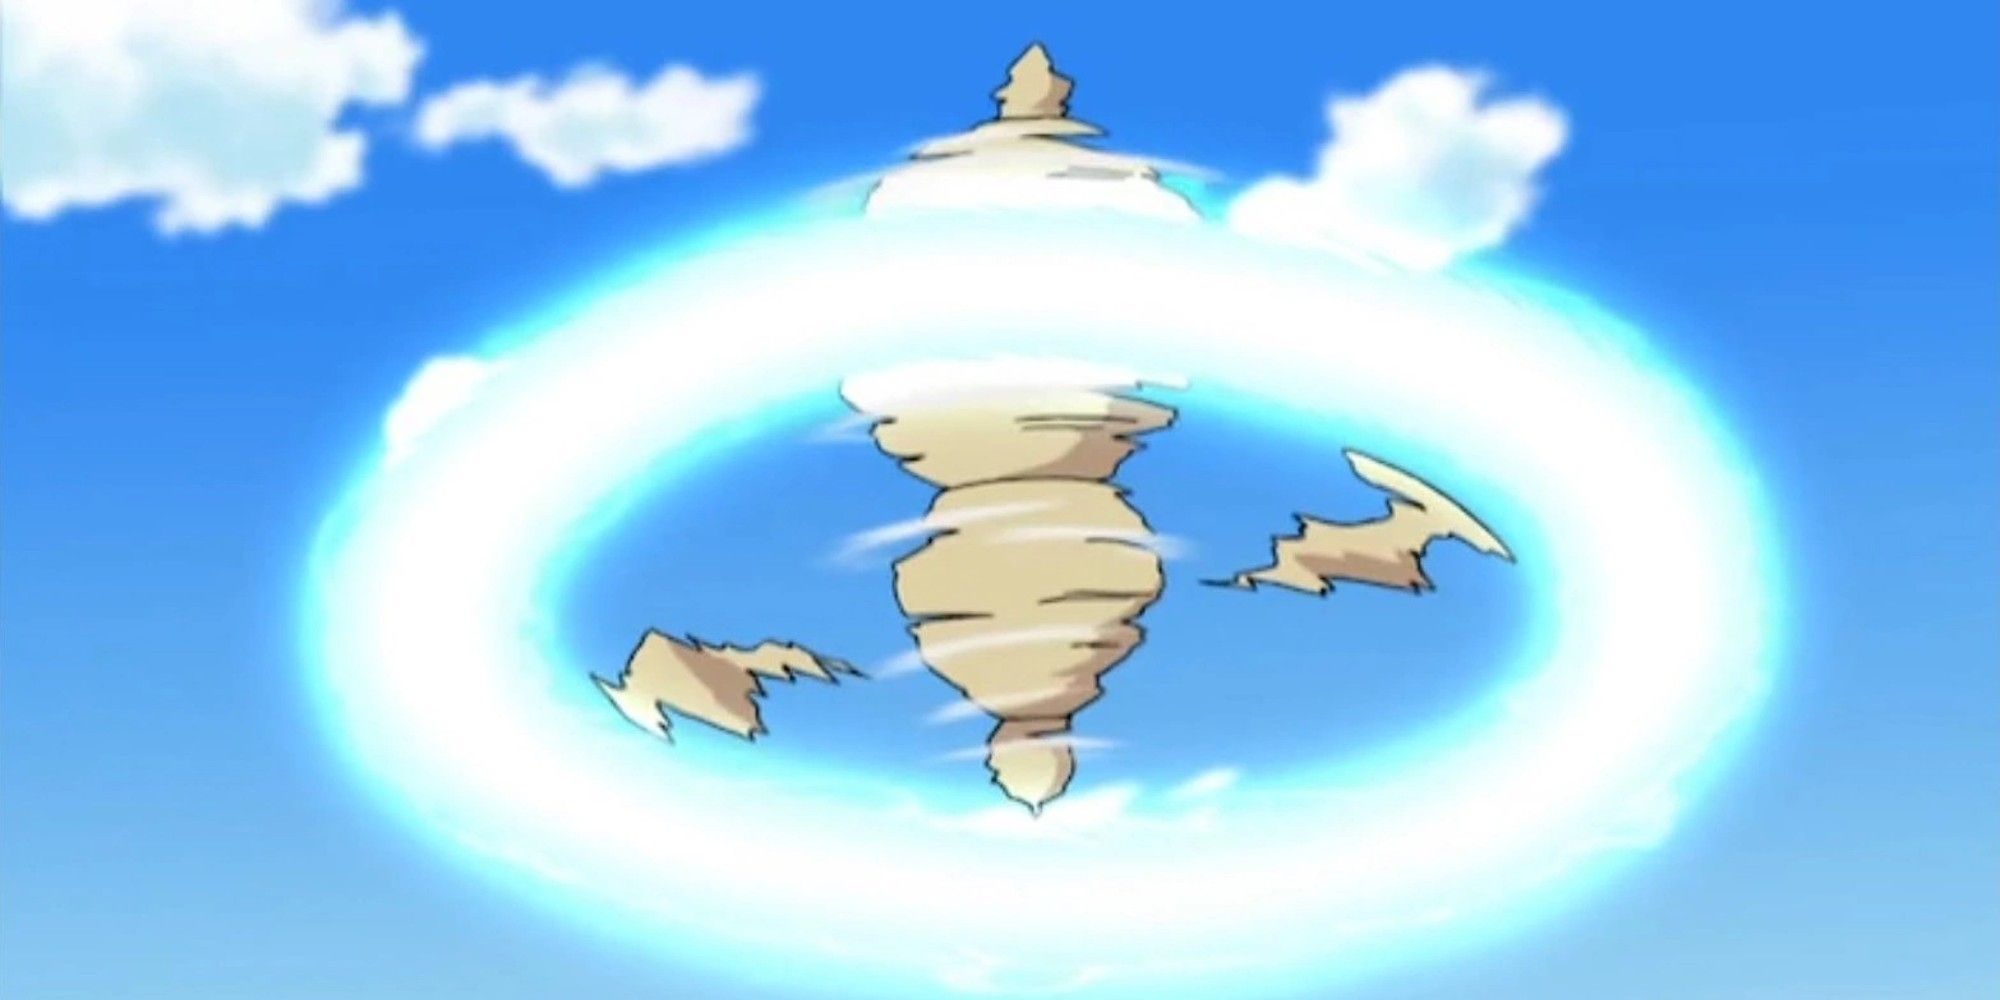 Baltoy using Gyro Ball in the air from the anime